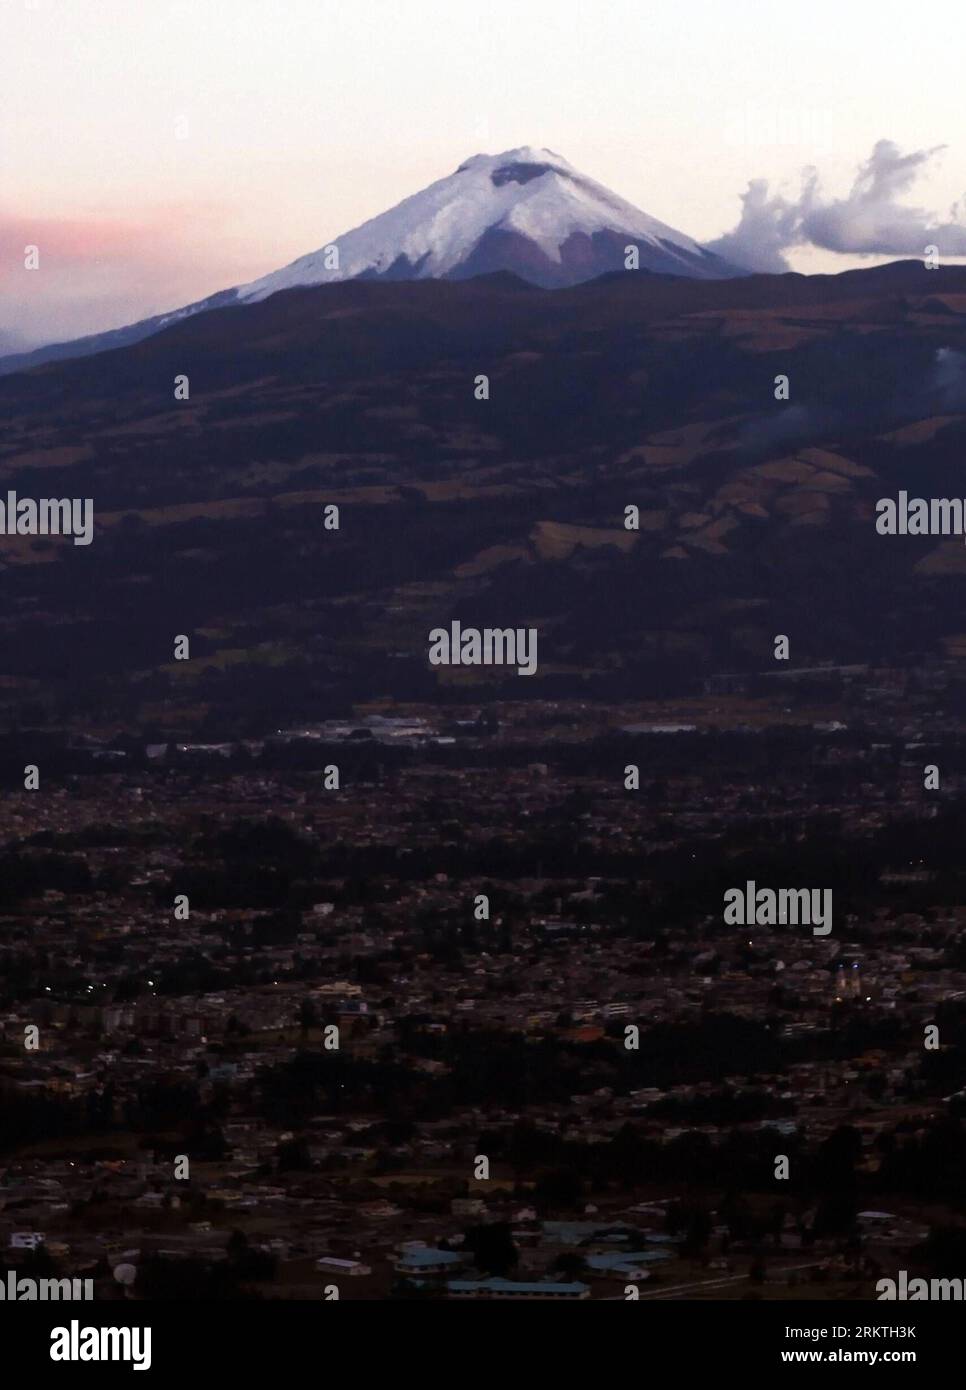 Bildnummer: 58477876  Datum: 16.09.2012  Copyright: imago/Xinhua QUITO, Sept. 16, 2012 - Cotopaxi volcano, second highest summit in Ecuador, is seen from Quito, Ecuador, on Sept. 16, 2012. Cotopaxi is a volcano located about 50 kilometers south of Quito, reaching a height of 5,897 meters. (Xinhua/Santiago Armas) (mp) (sp) ECUADOR-QUITO-VOLCANO PUBLICATIONxNOTxINxCHN Gesellschaft Landschaft Vulkan Berg totale x0x xmb 2012 hoch     58477876 Date 16 09 2012 Copyright Imago XINHUA Quito Sept 16 2012 Cotopaxi Volcano Second Highest Summit in Ecuador IS Lakes from Quito Ecuador ON Sept 16 2012 Cotop Stock Photo